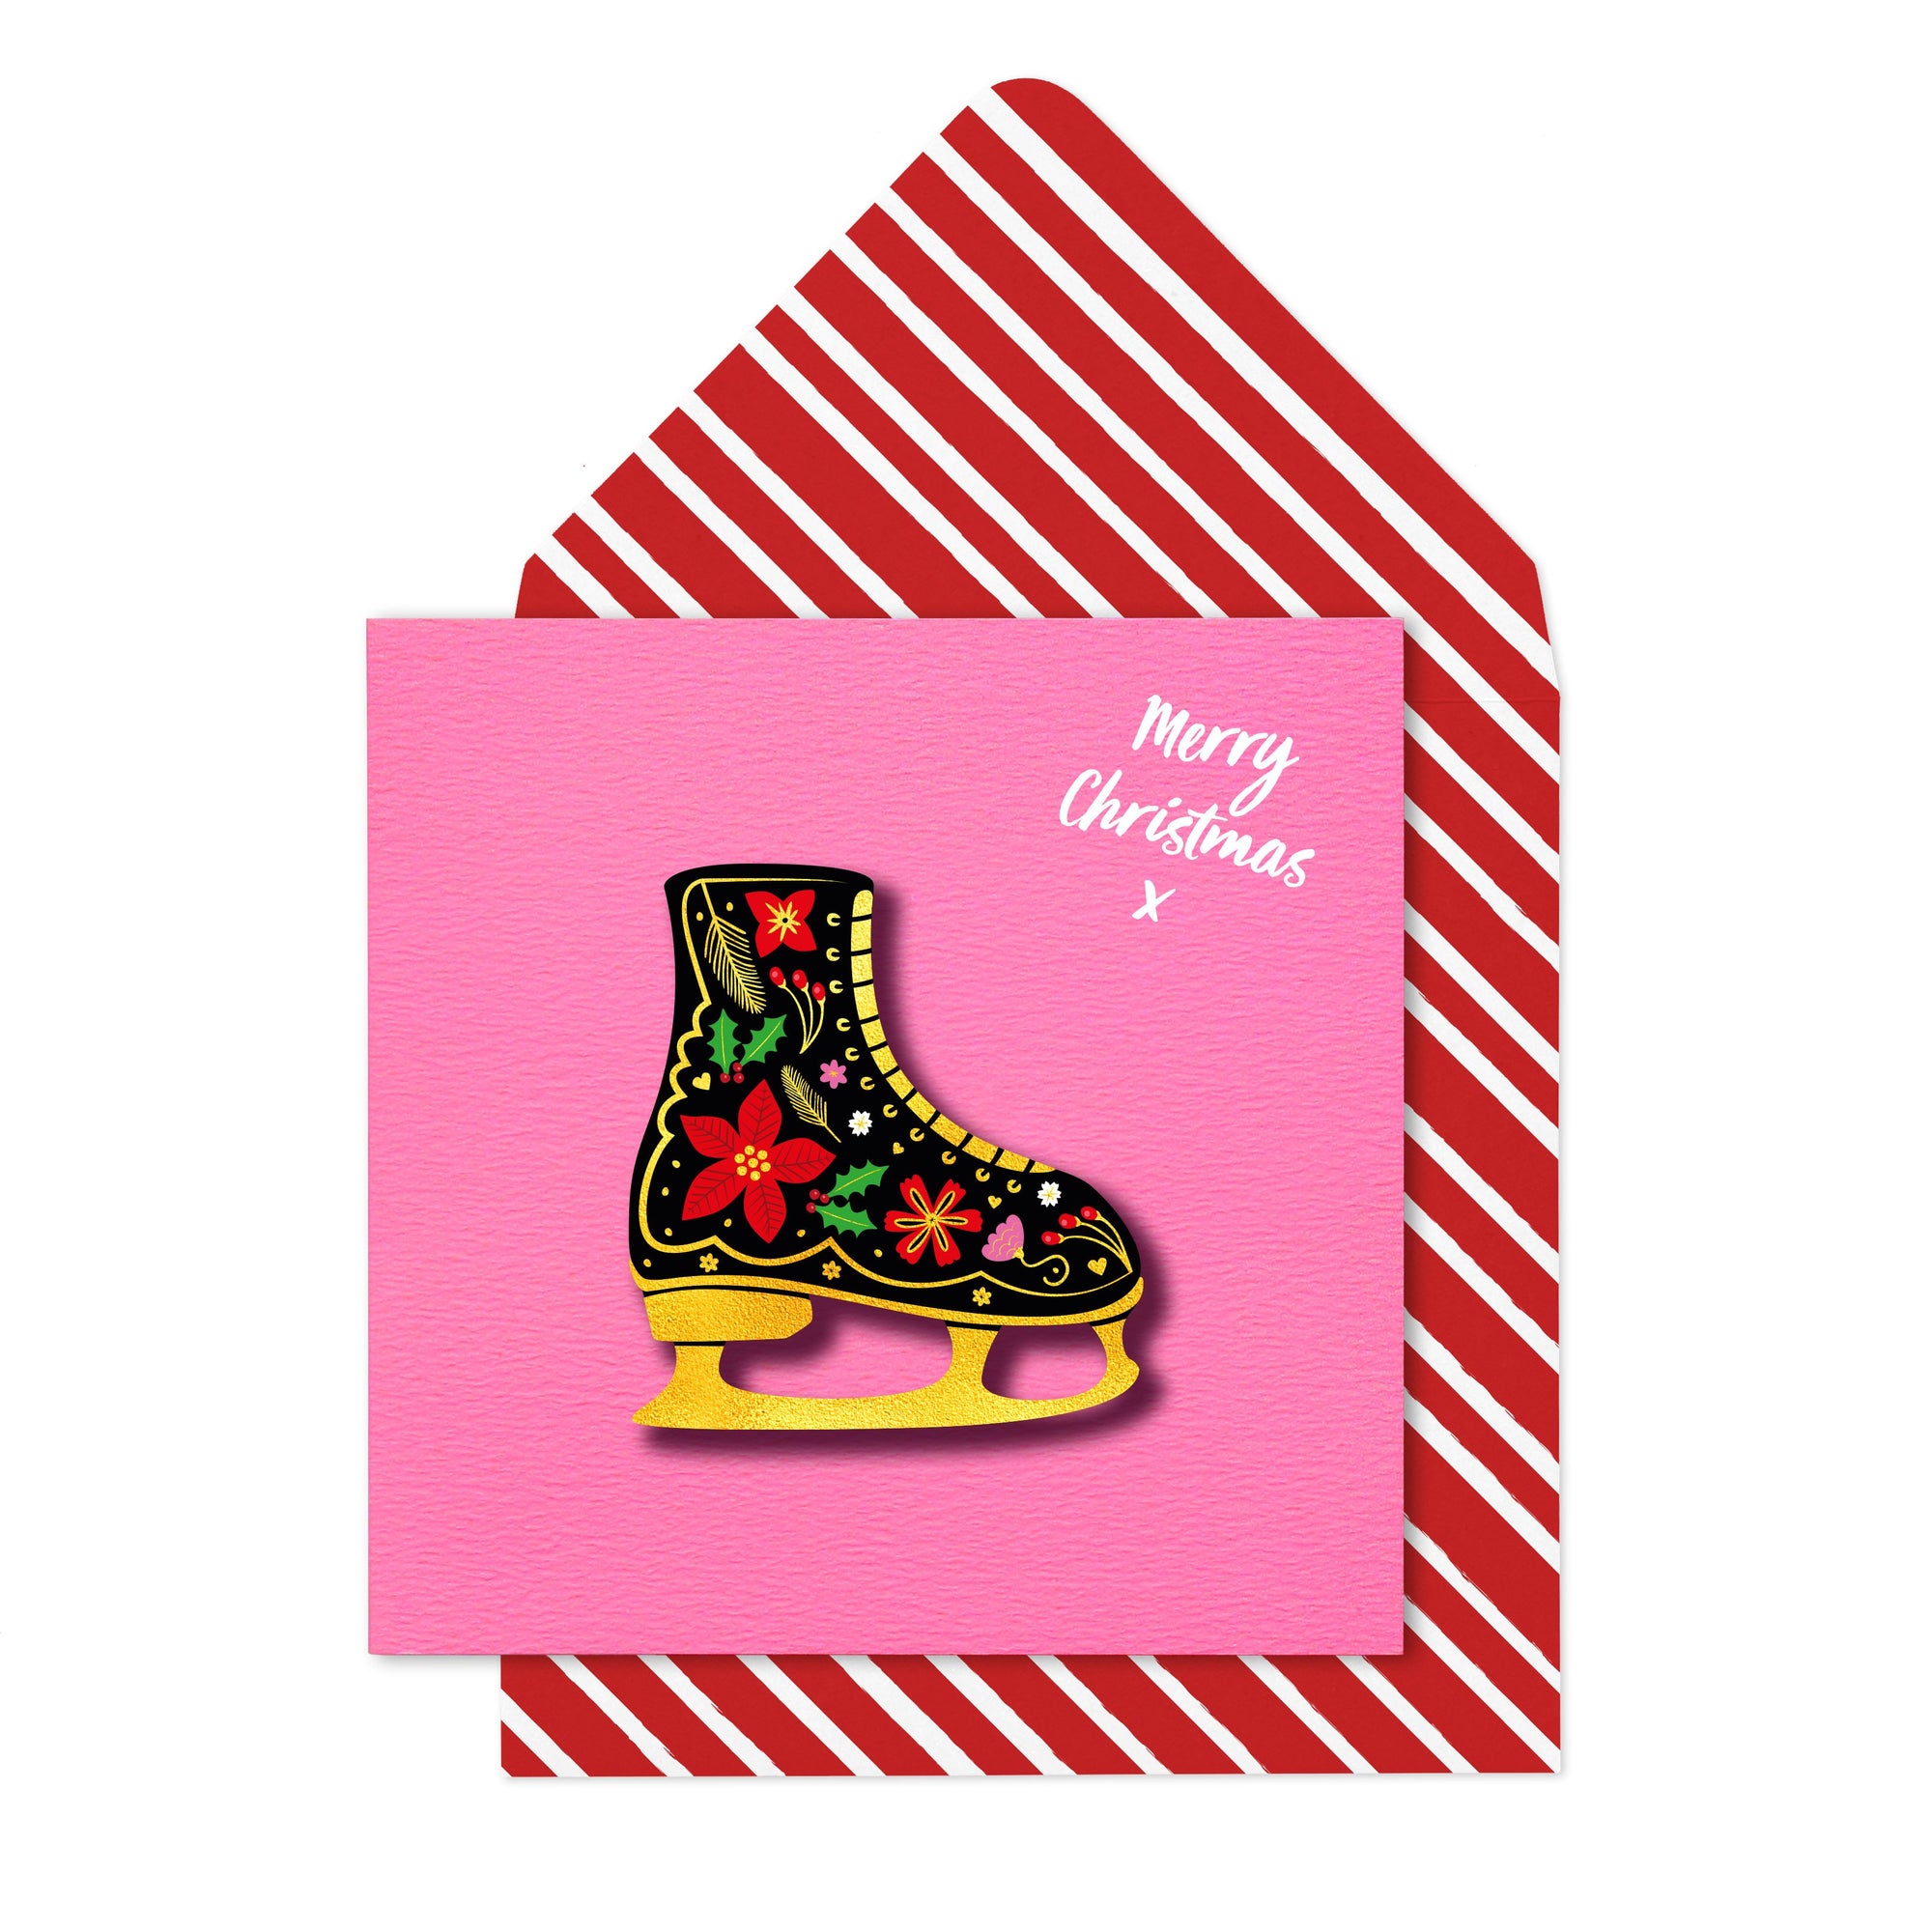 Merry Christmas' Floral Ice Skate - TACHE Trade